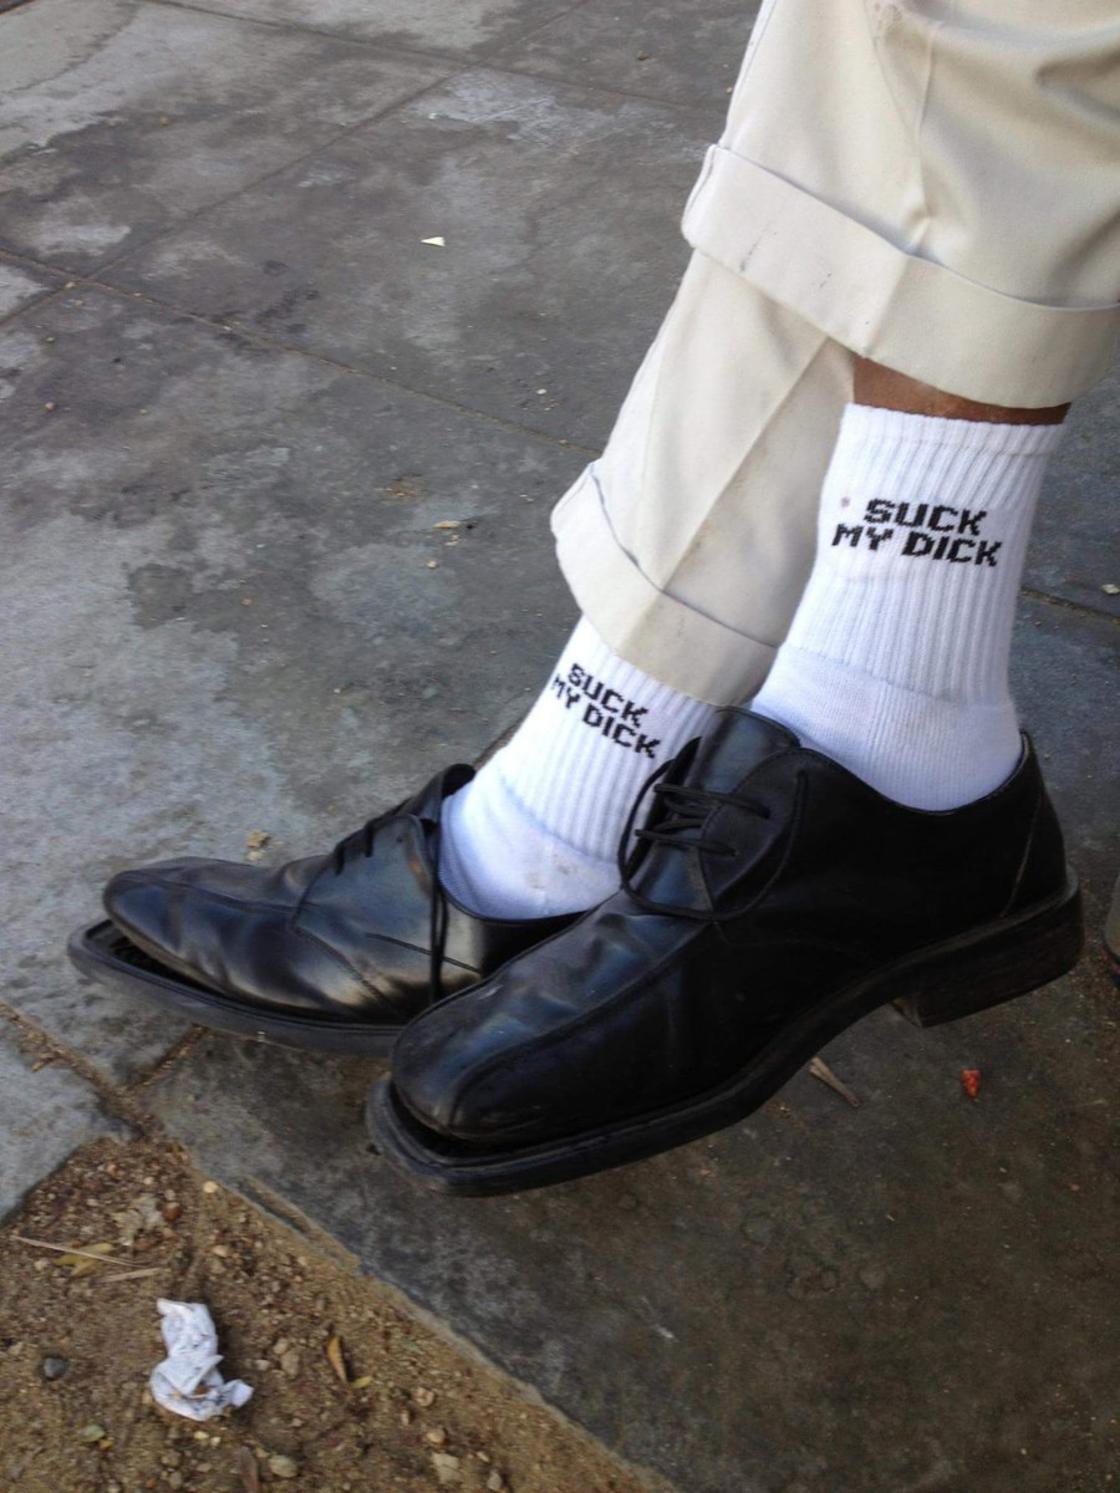 Man with crass comment on his socks, because you know girls are checking that out.